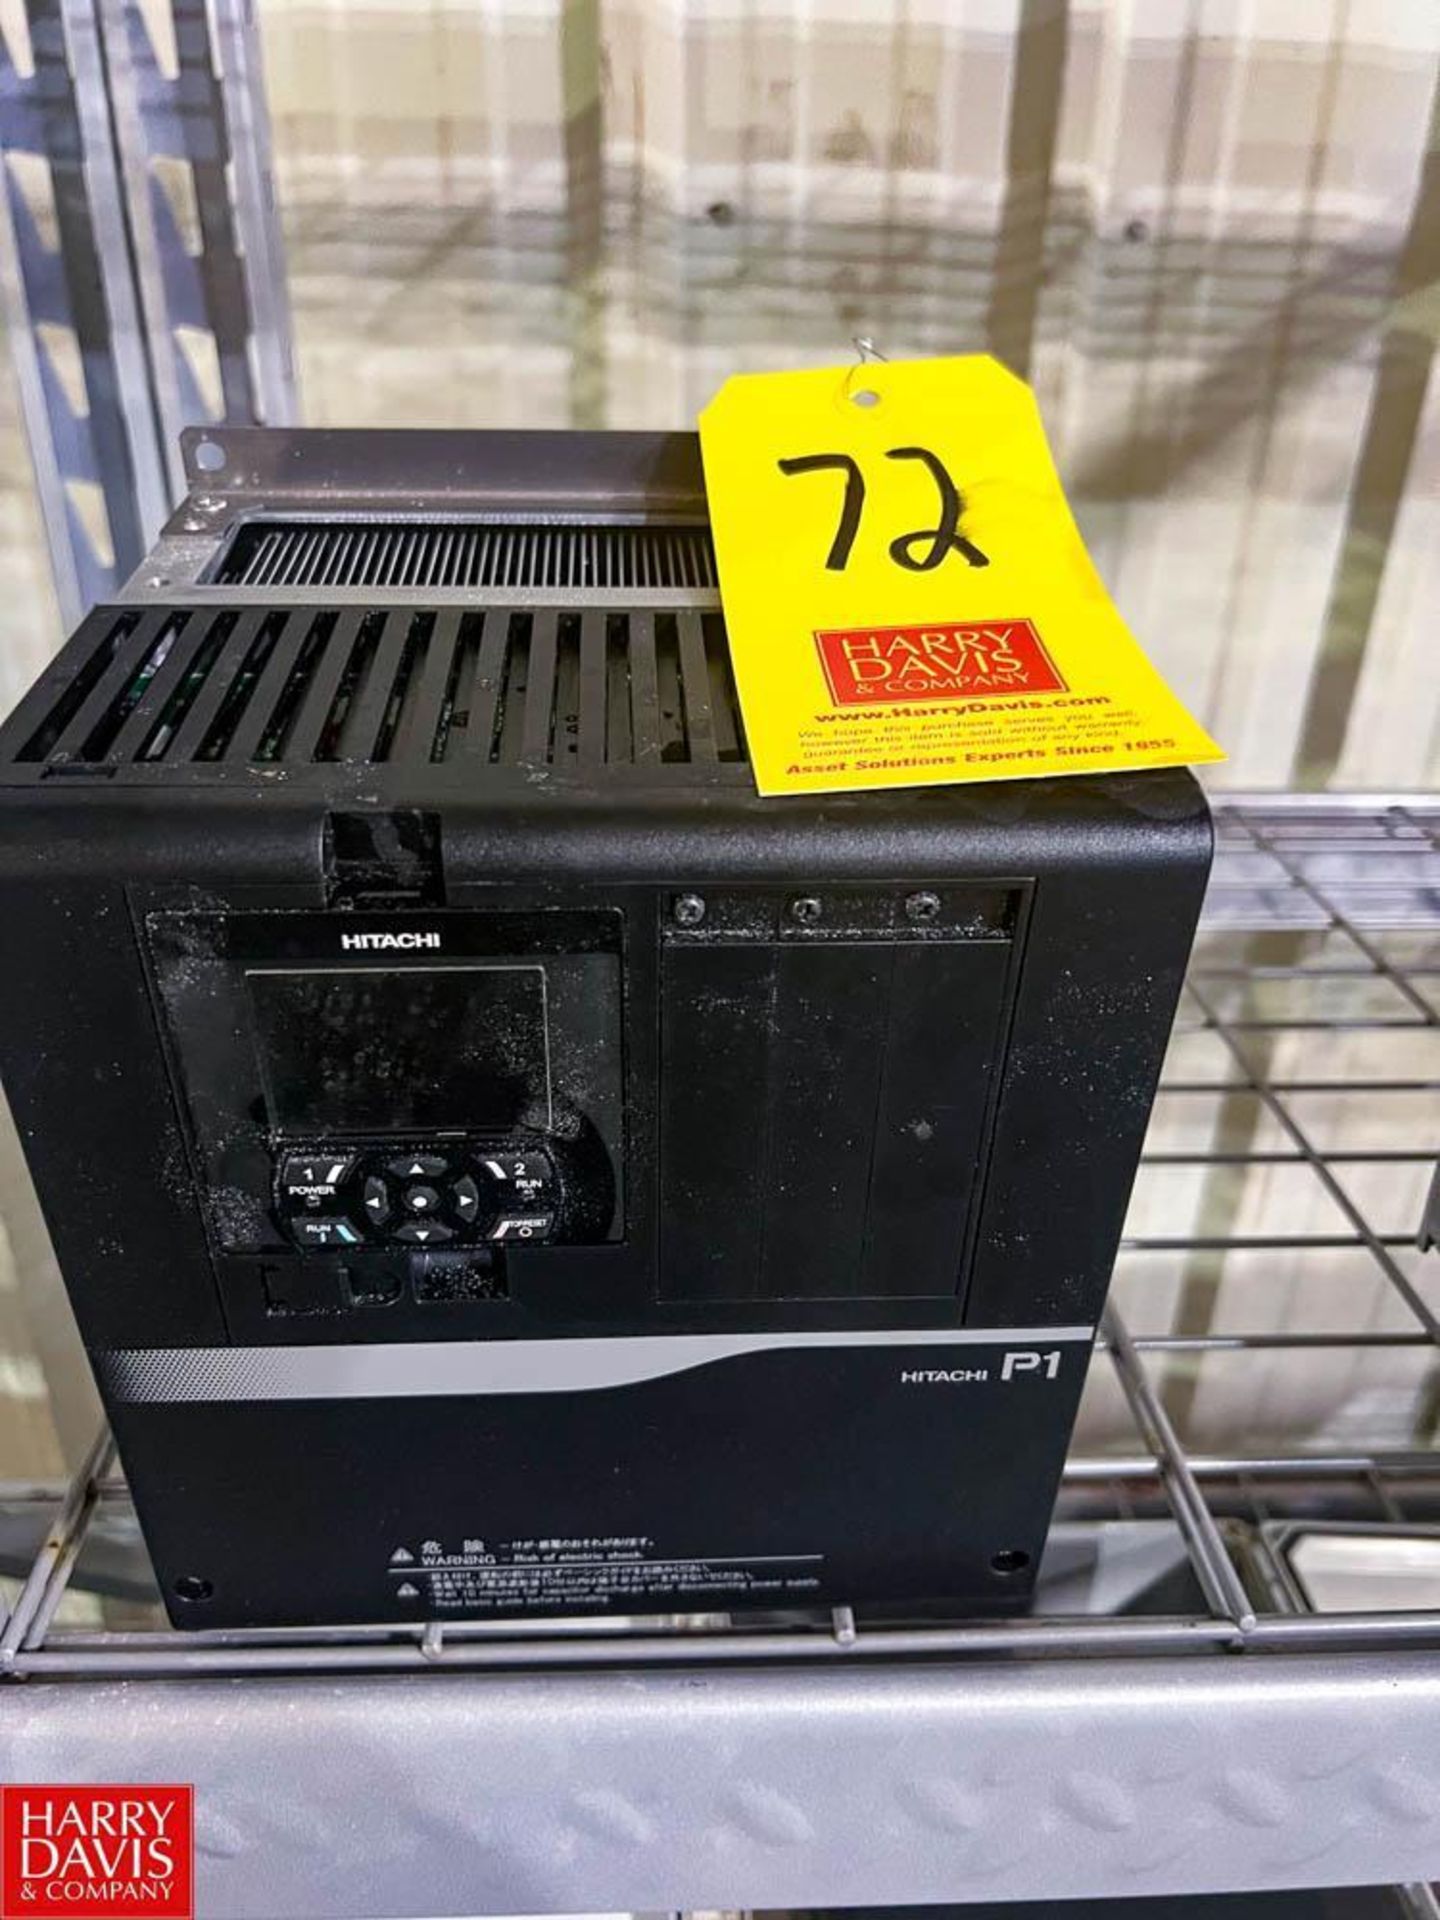 Hitachi P1 Variable Frequency Drive - Rigging Fee: $75